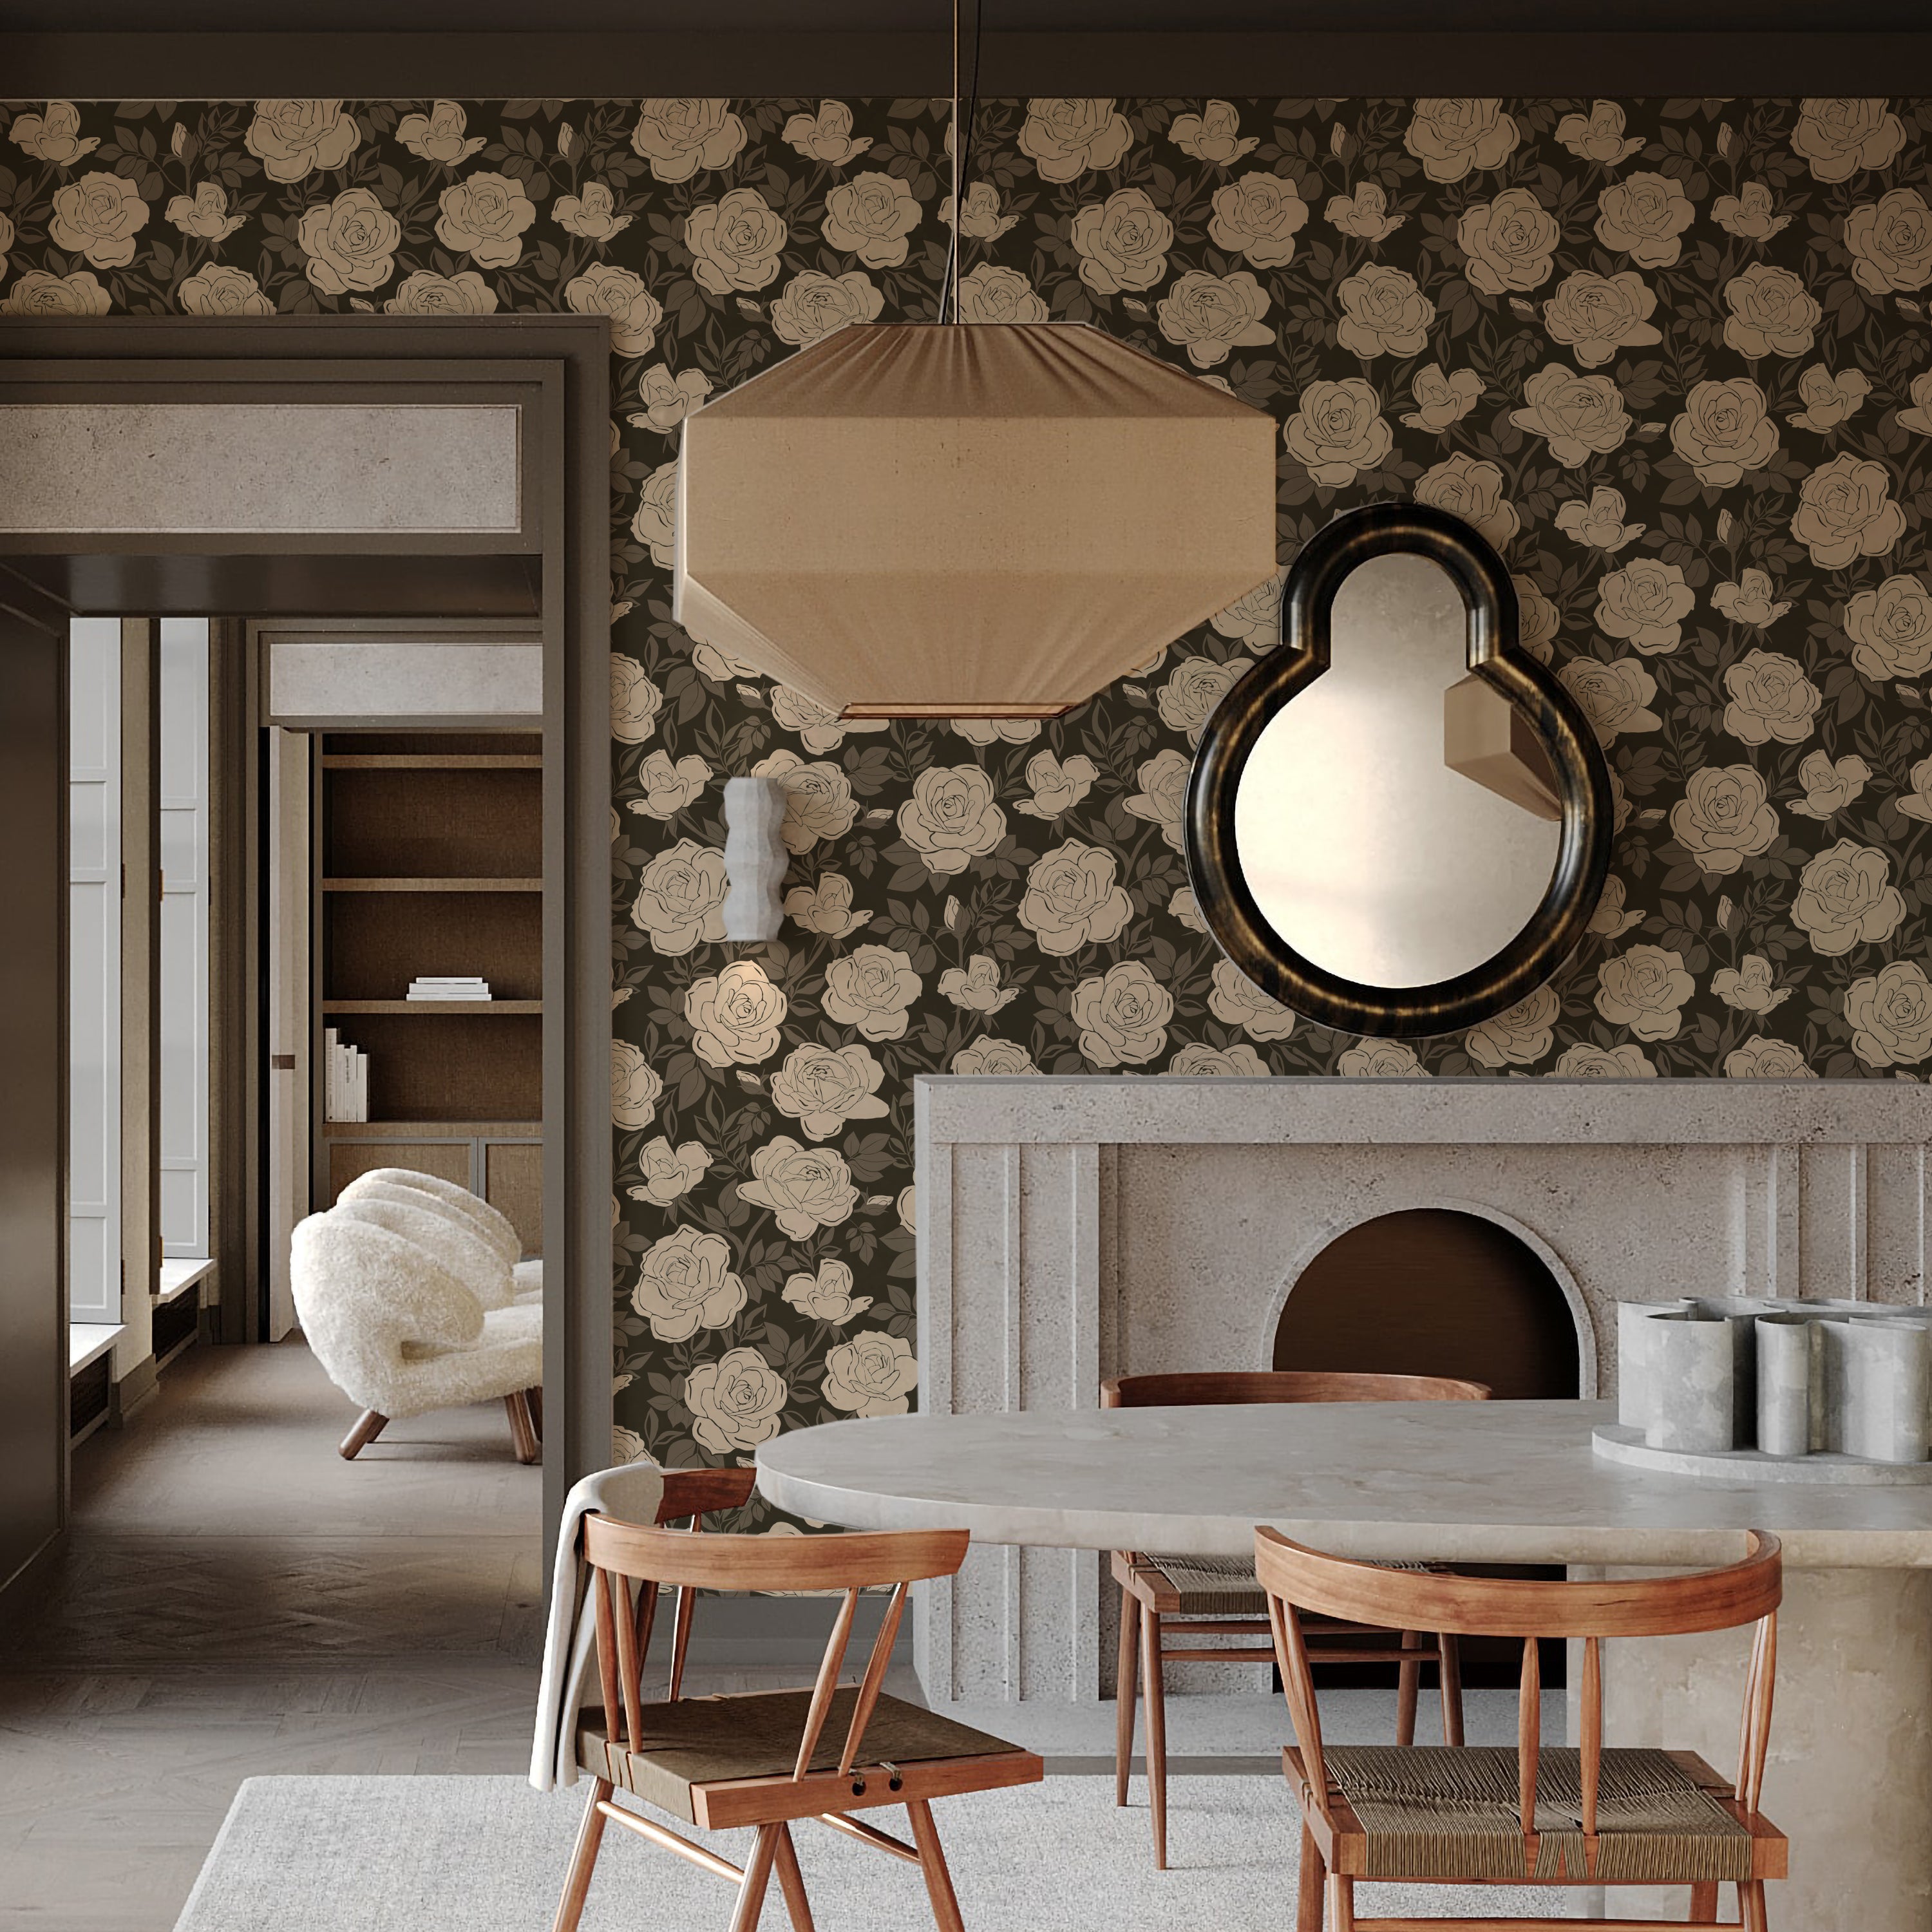 A chic dining area with a modern fireplace, showcasing chairs and a paper pendant lamp, with a wall adorned by a wallpaper pattern of stylized cream roses set against a dark backdrop with olive green leafy accents.